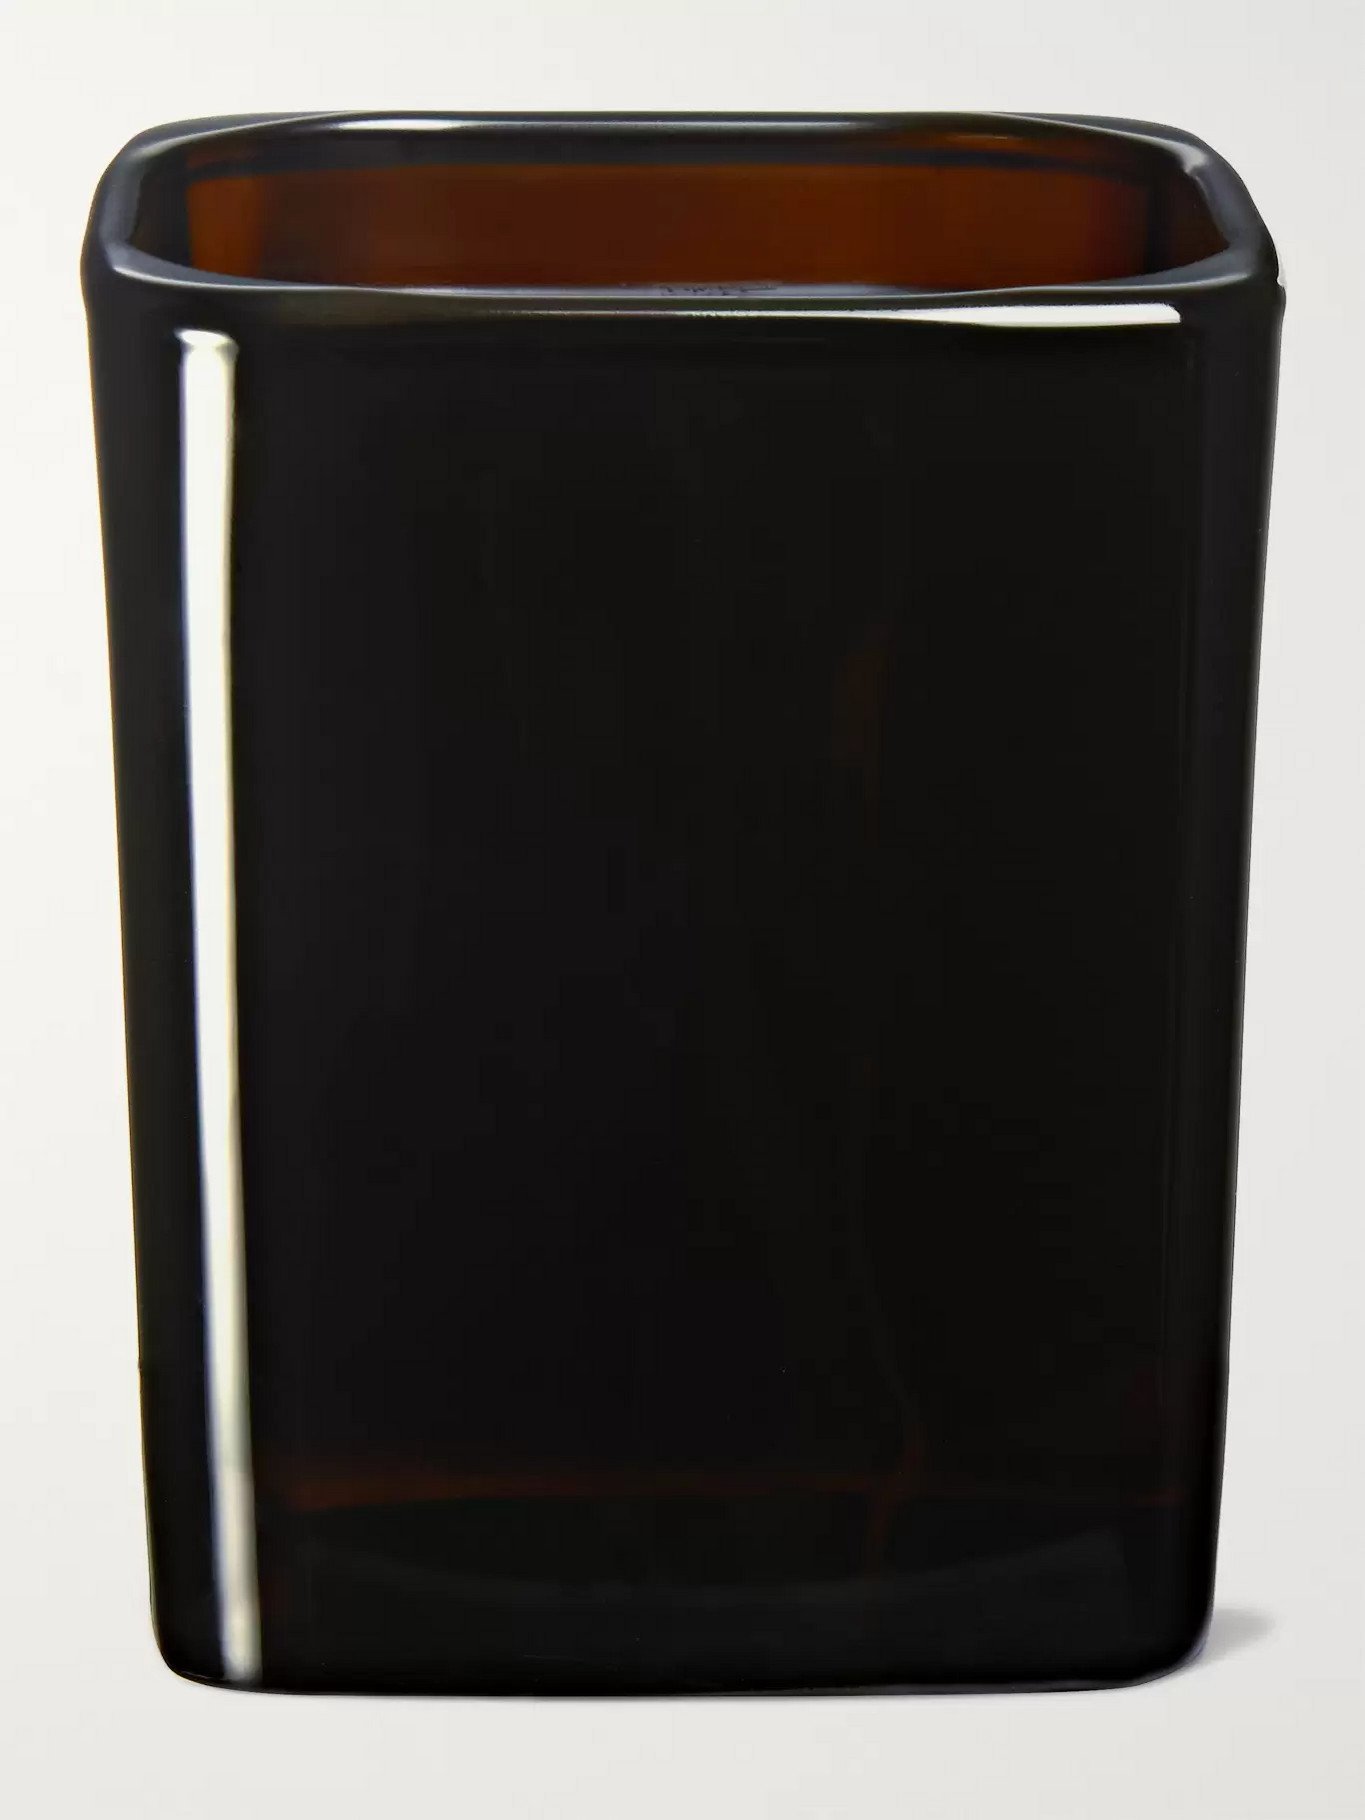 TOM FORD BEAUTY - Tobacco Vanille Scented Candle, 200g - Brown - one size  TOM FORD BEAUTY